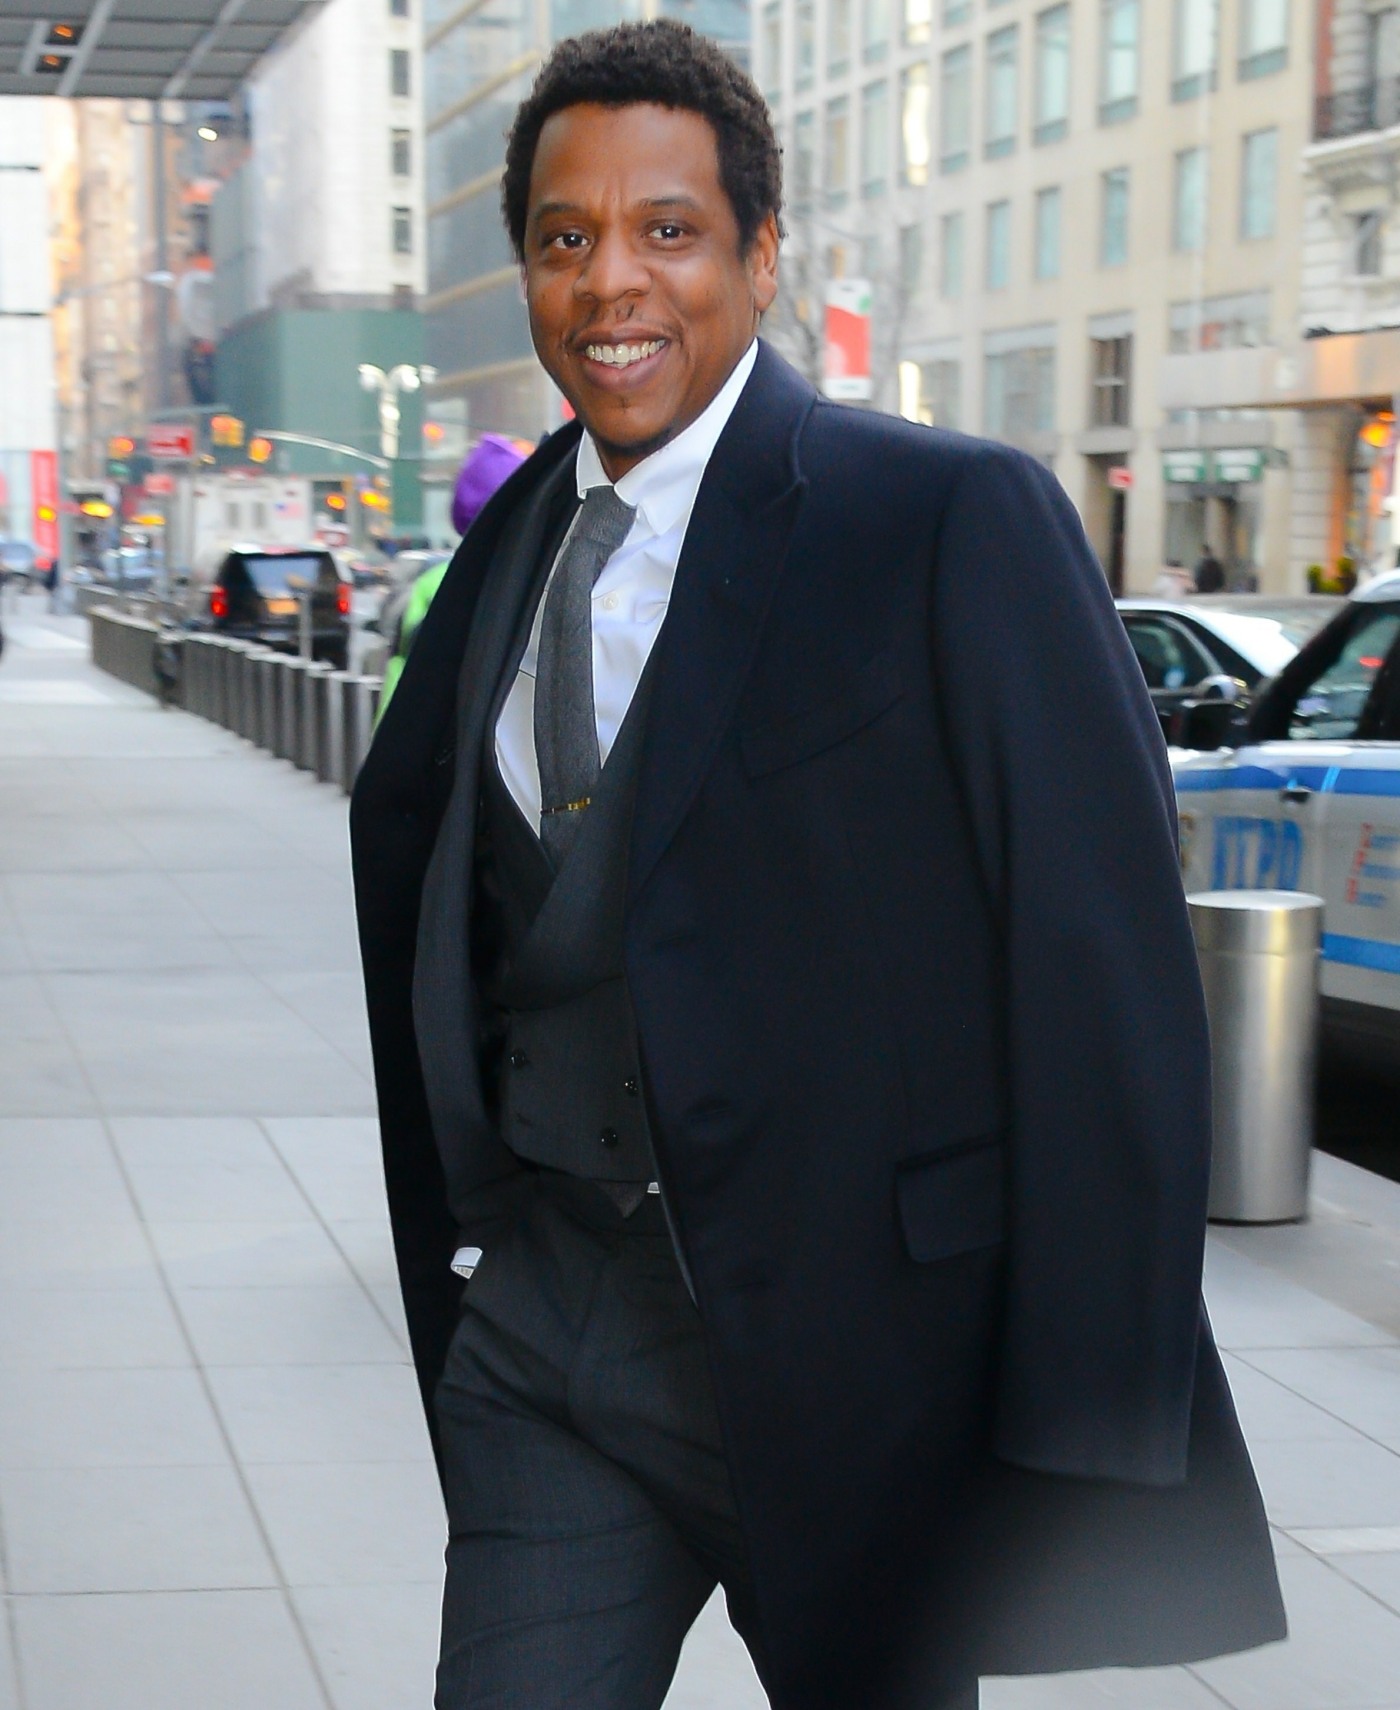 Jay Z heads to the 2018 Roc Nation Brunch